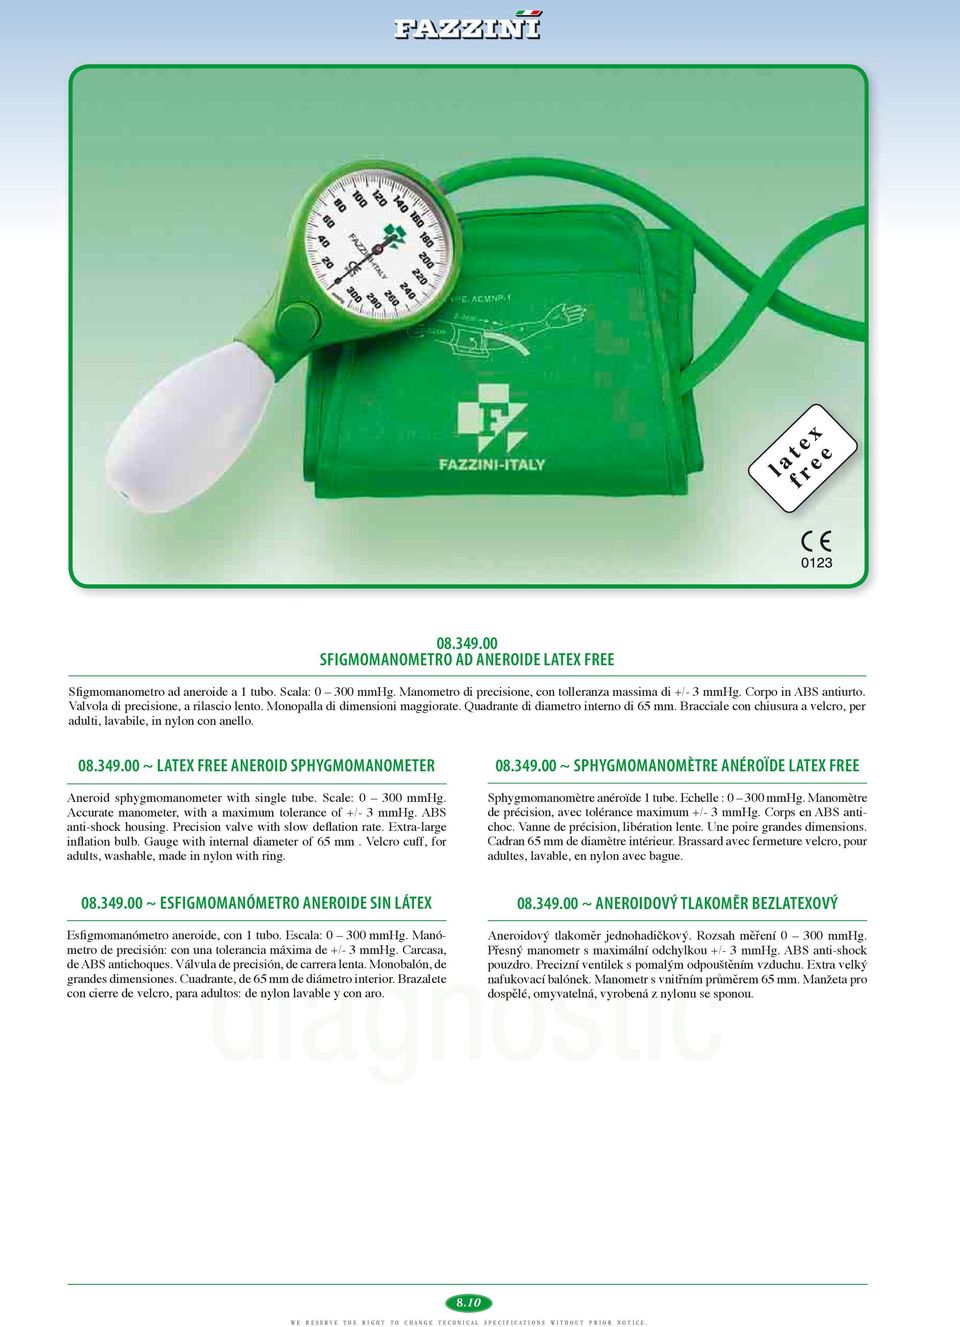 00 ~ LATEX FREE ANEROID SPHYGMOMANOMETER Aneroid sphygmomanometer with single tube. Scale: 0 300 mmhg. Accurate manometer, with a maximum tolerance of +/- 3 mmhg. ABS anti-shock housing.